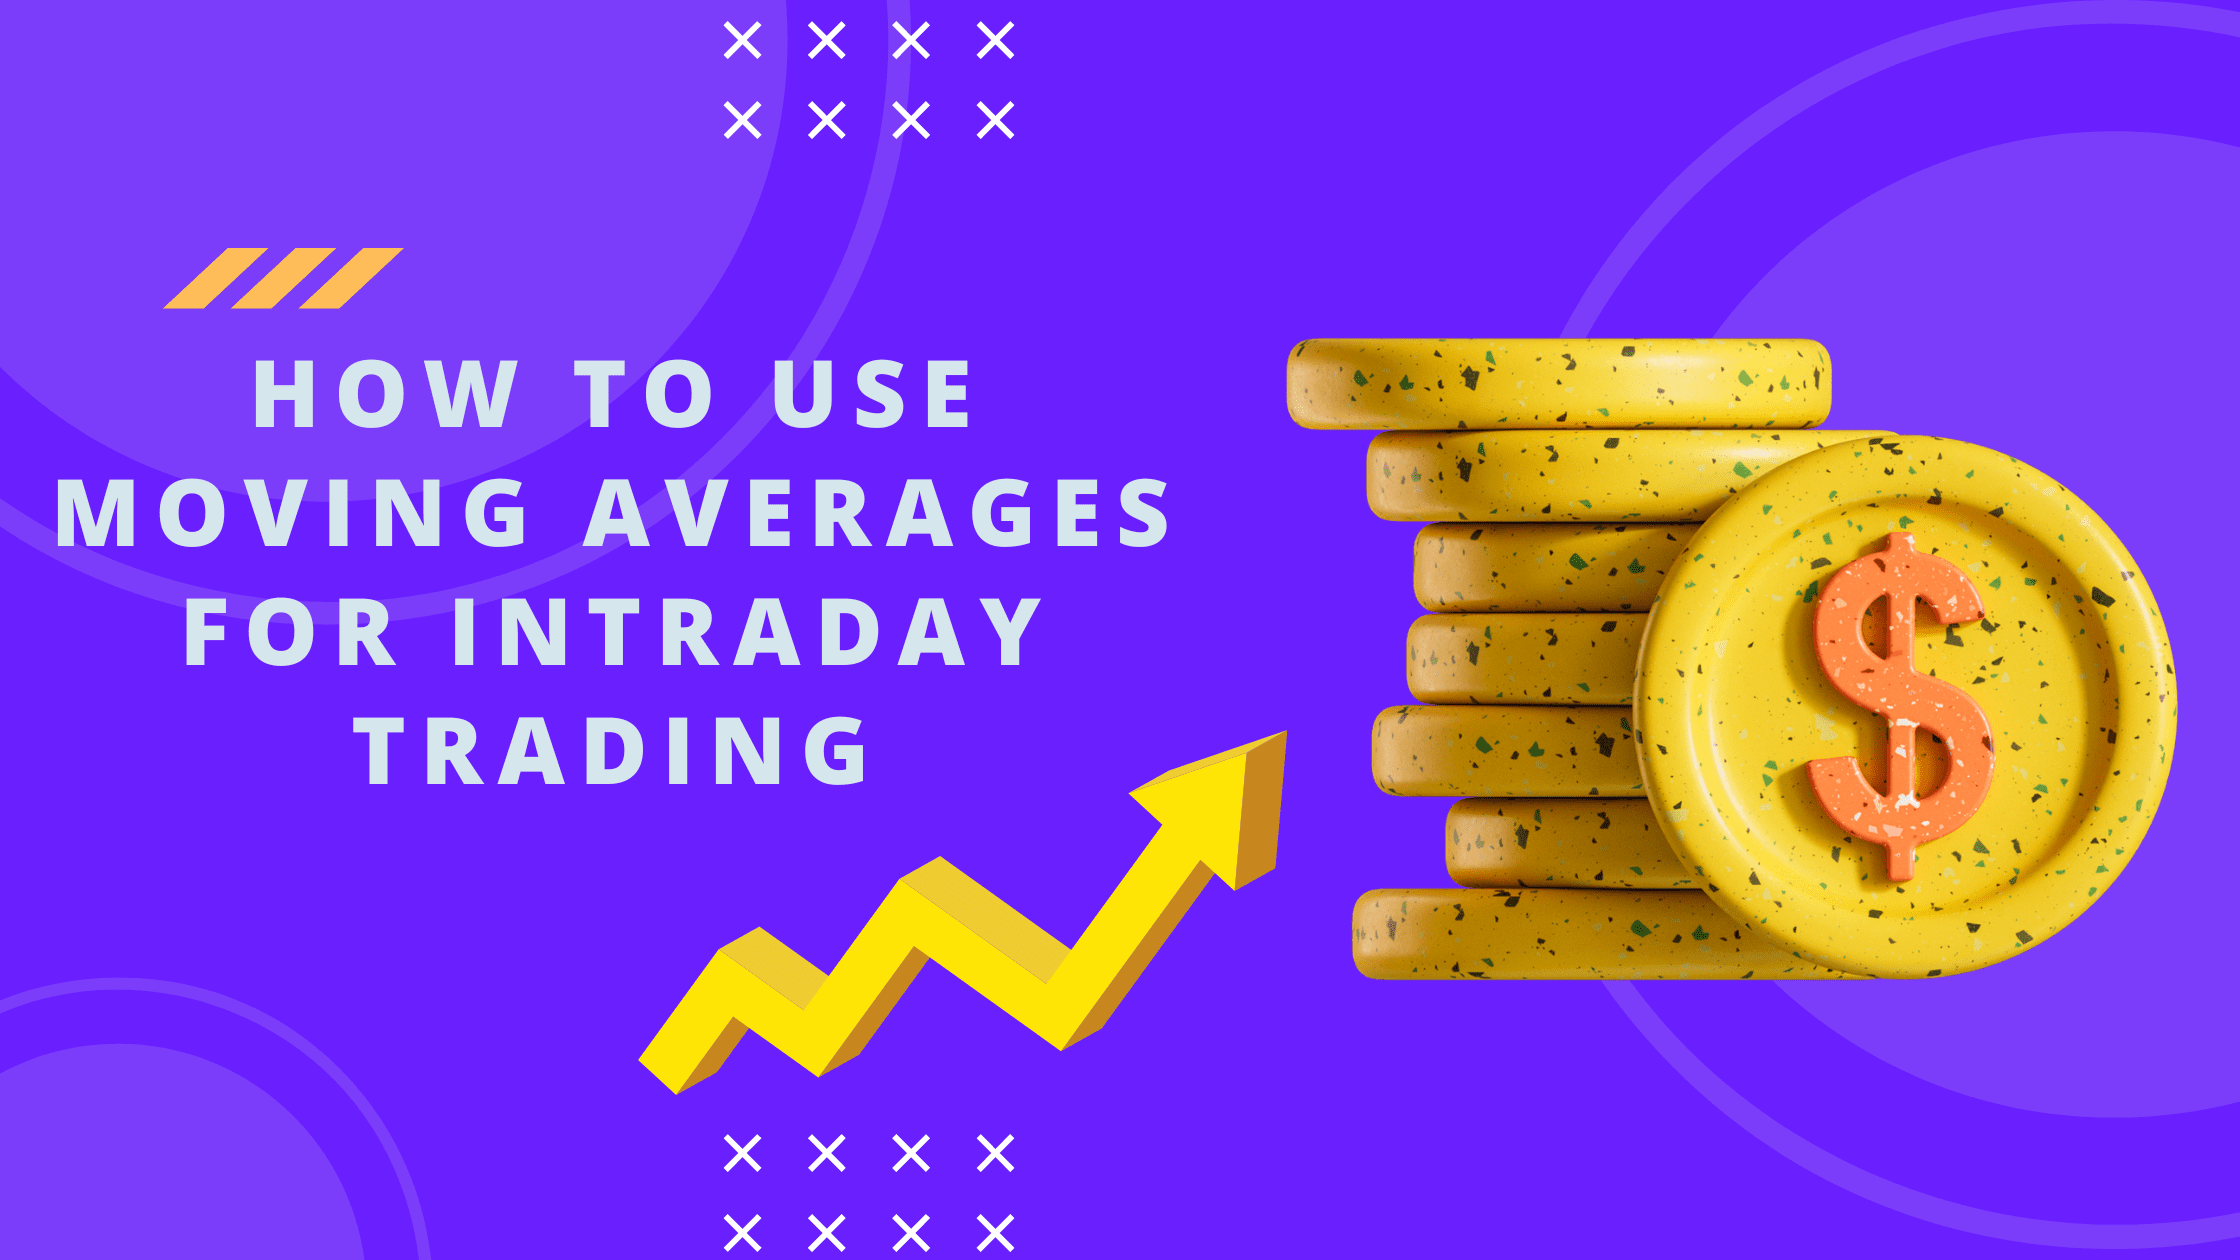 How to Use Moving Averages for Intraday Trading